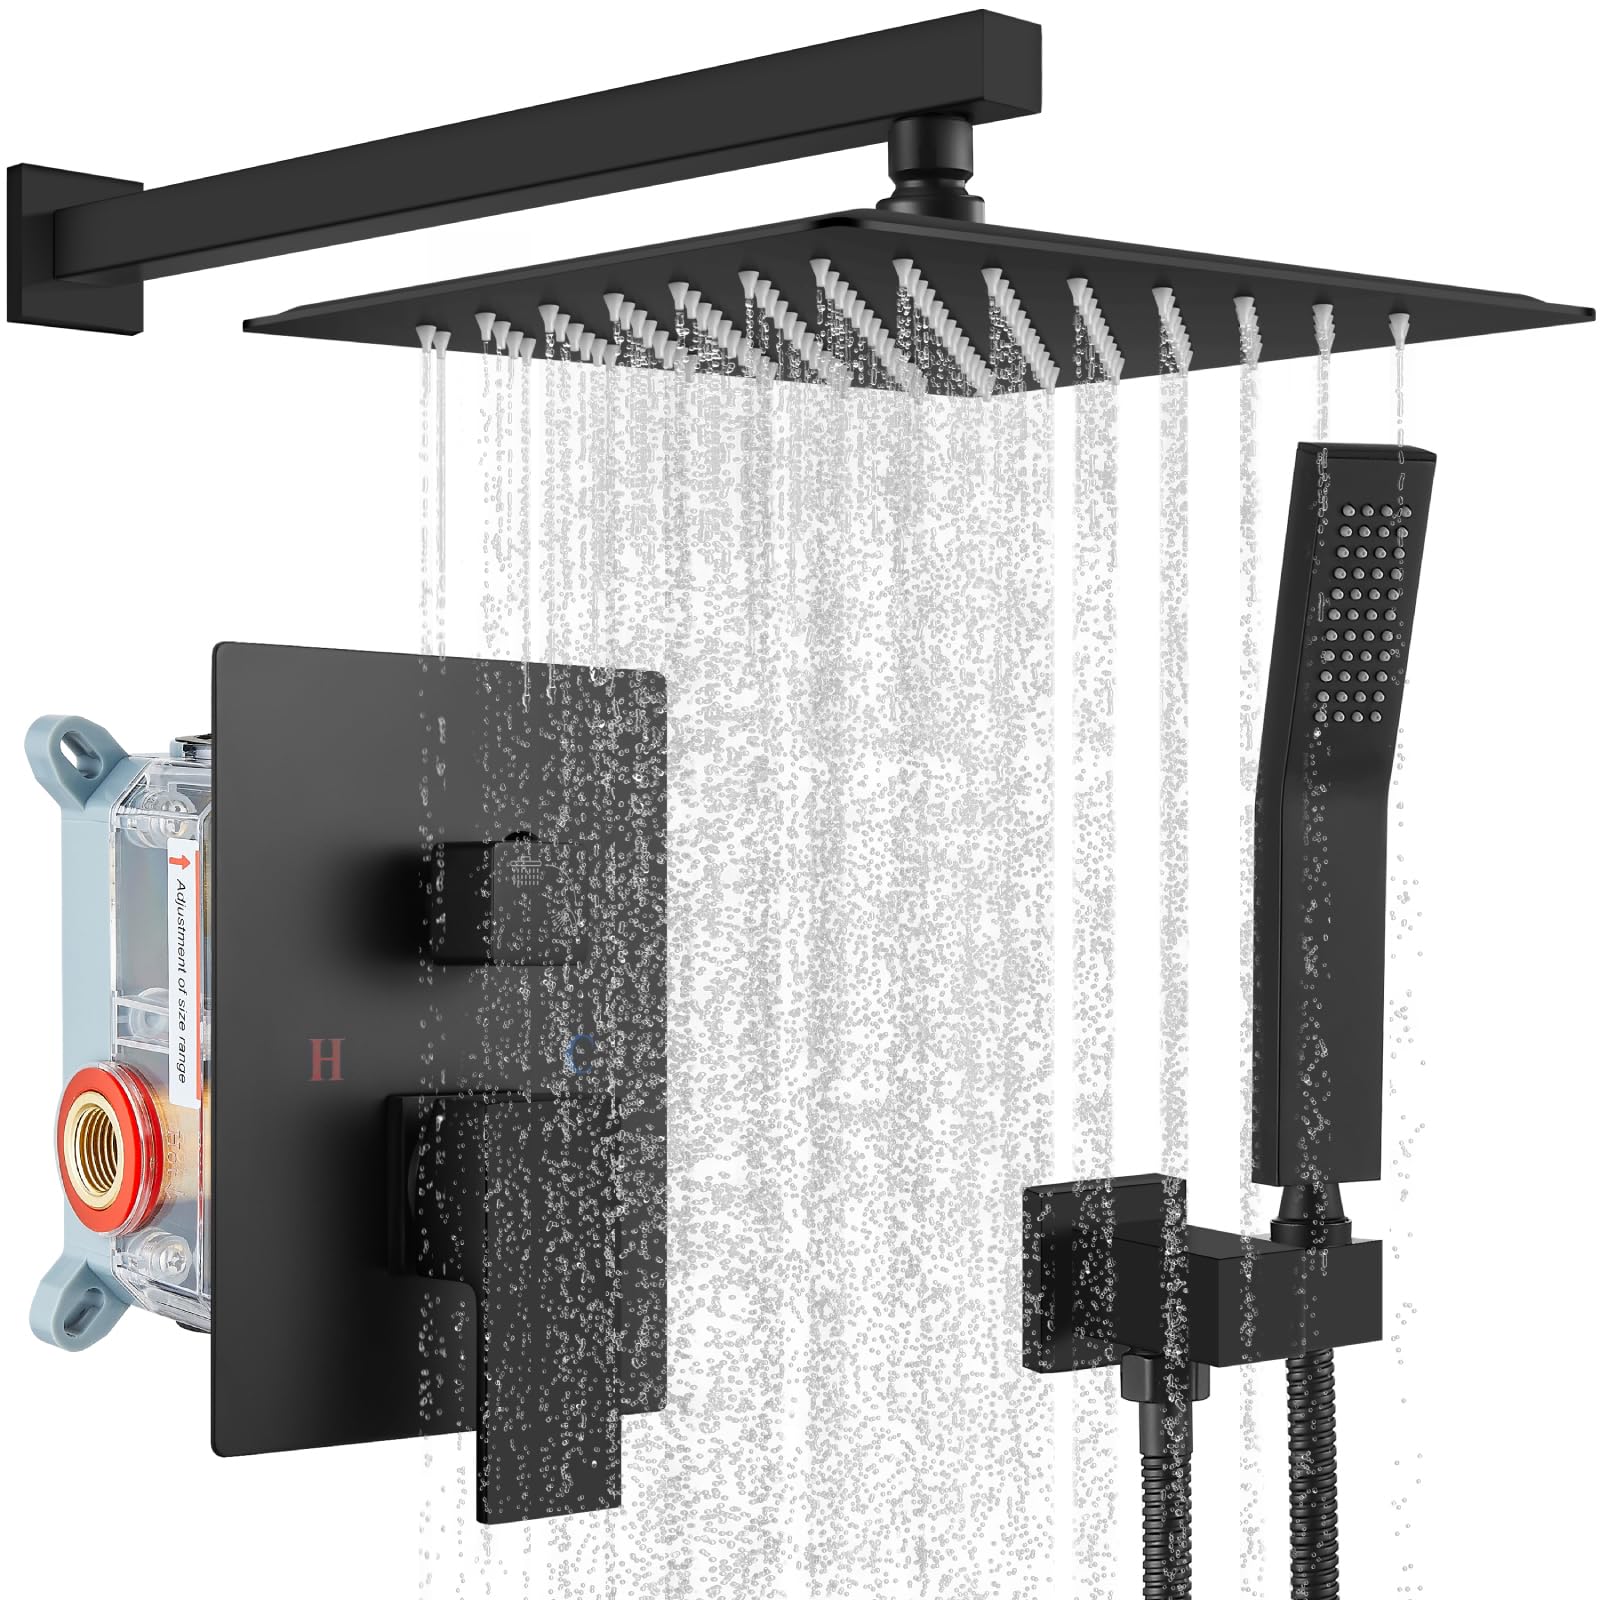 gotonovo Rain Shower System Matte Black Square 12 Inch Shower Head with Hand Held Shower Rough in Valve Rainfall Shower Complete Combo Set Wall Mounted Bathroom 12 inch Matte Black